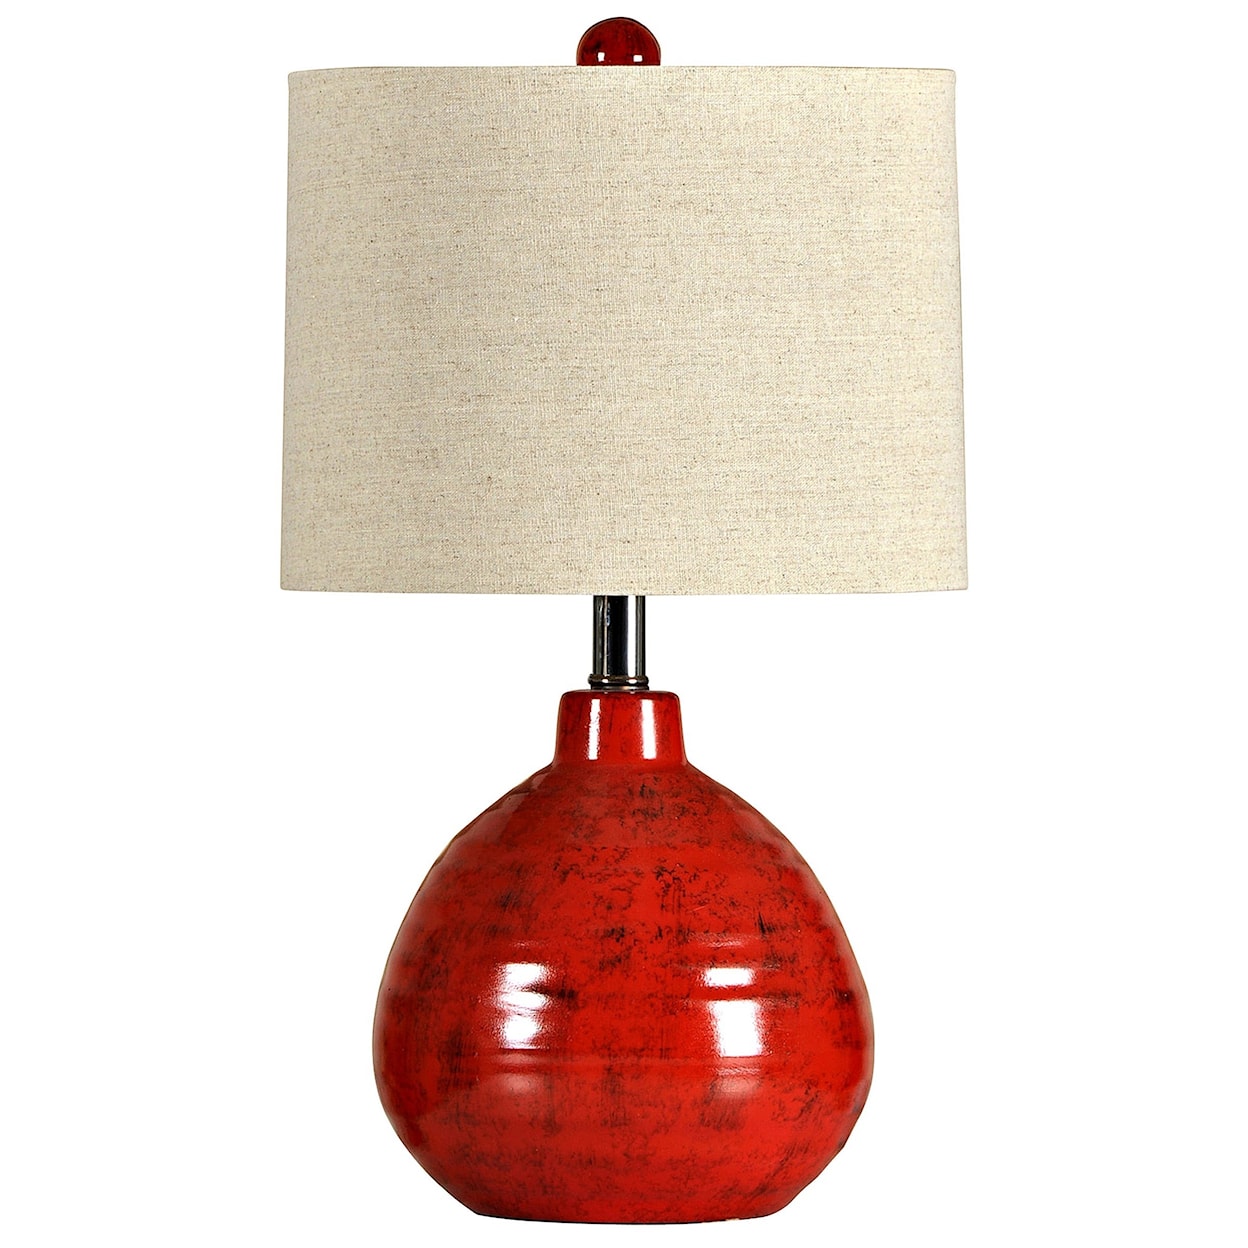 StyleCraft Lamps Accent Apple Red Ceramic Table Lamp